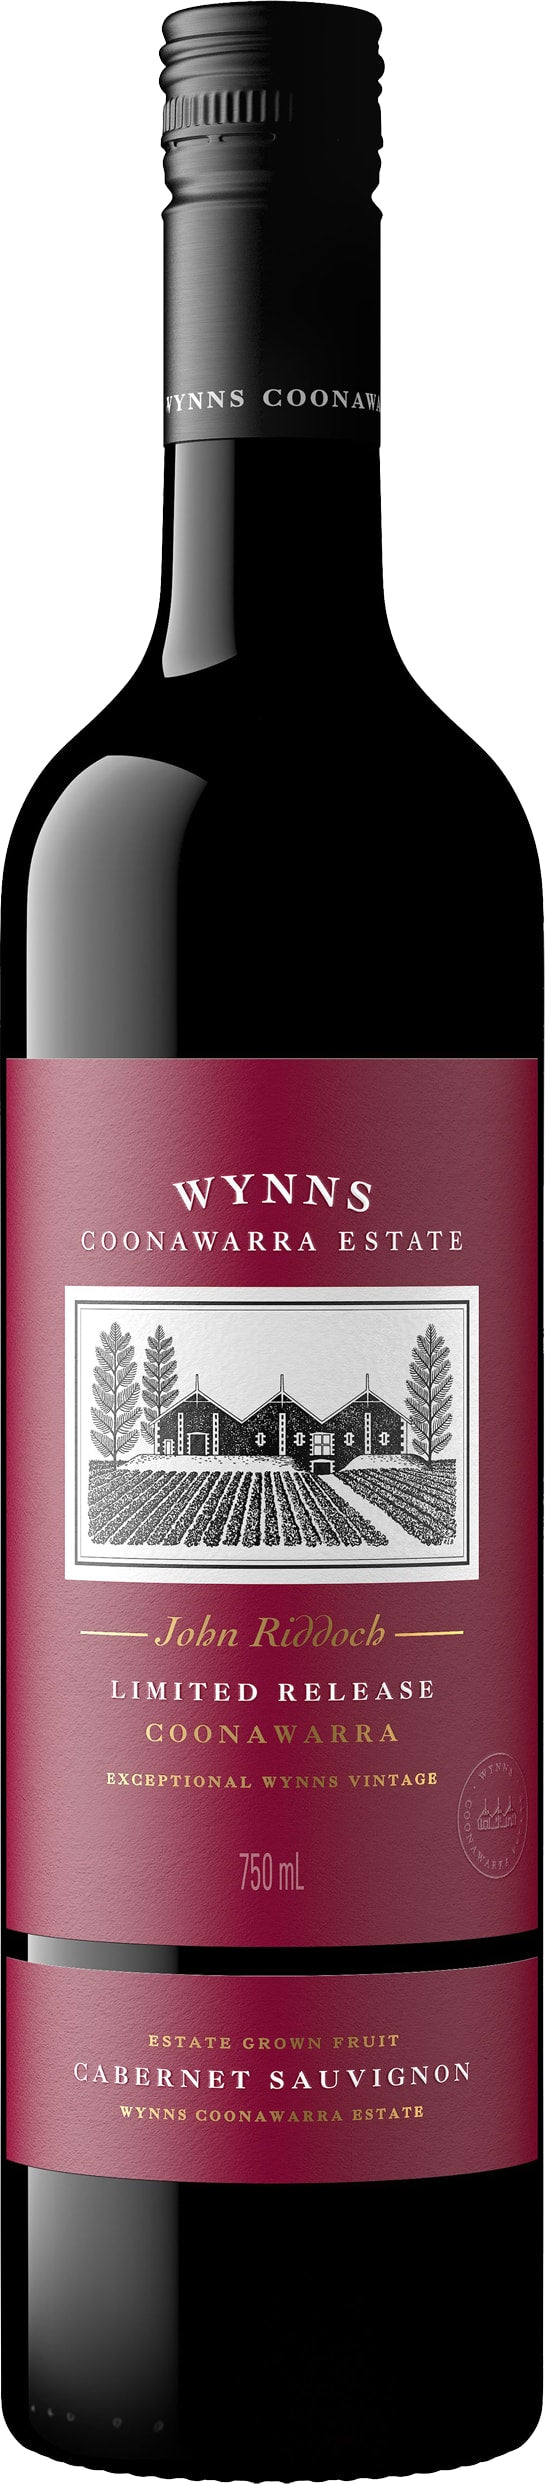 Wynns John Riddoch Limited Release Cabernet Sauvignon 2016 75cl - Buy Wynns Wines from GREAT WINES DIRECT wine shop